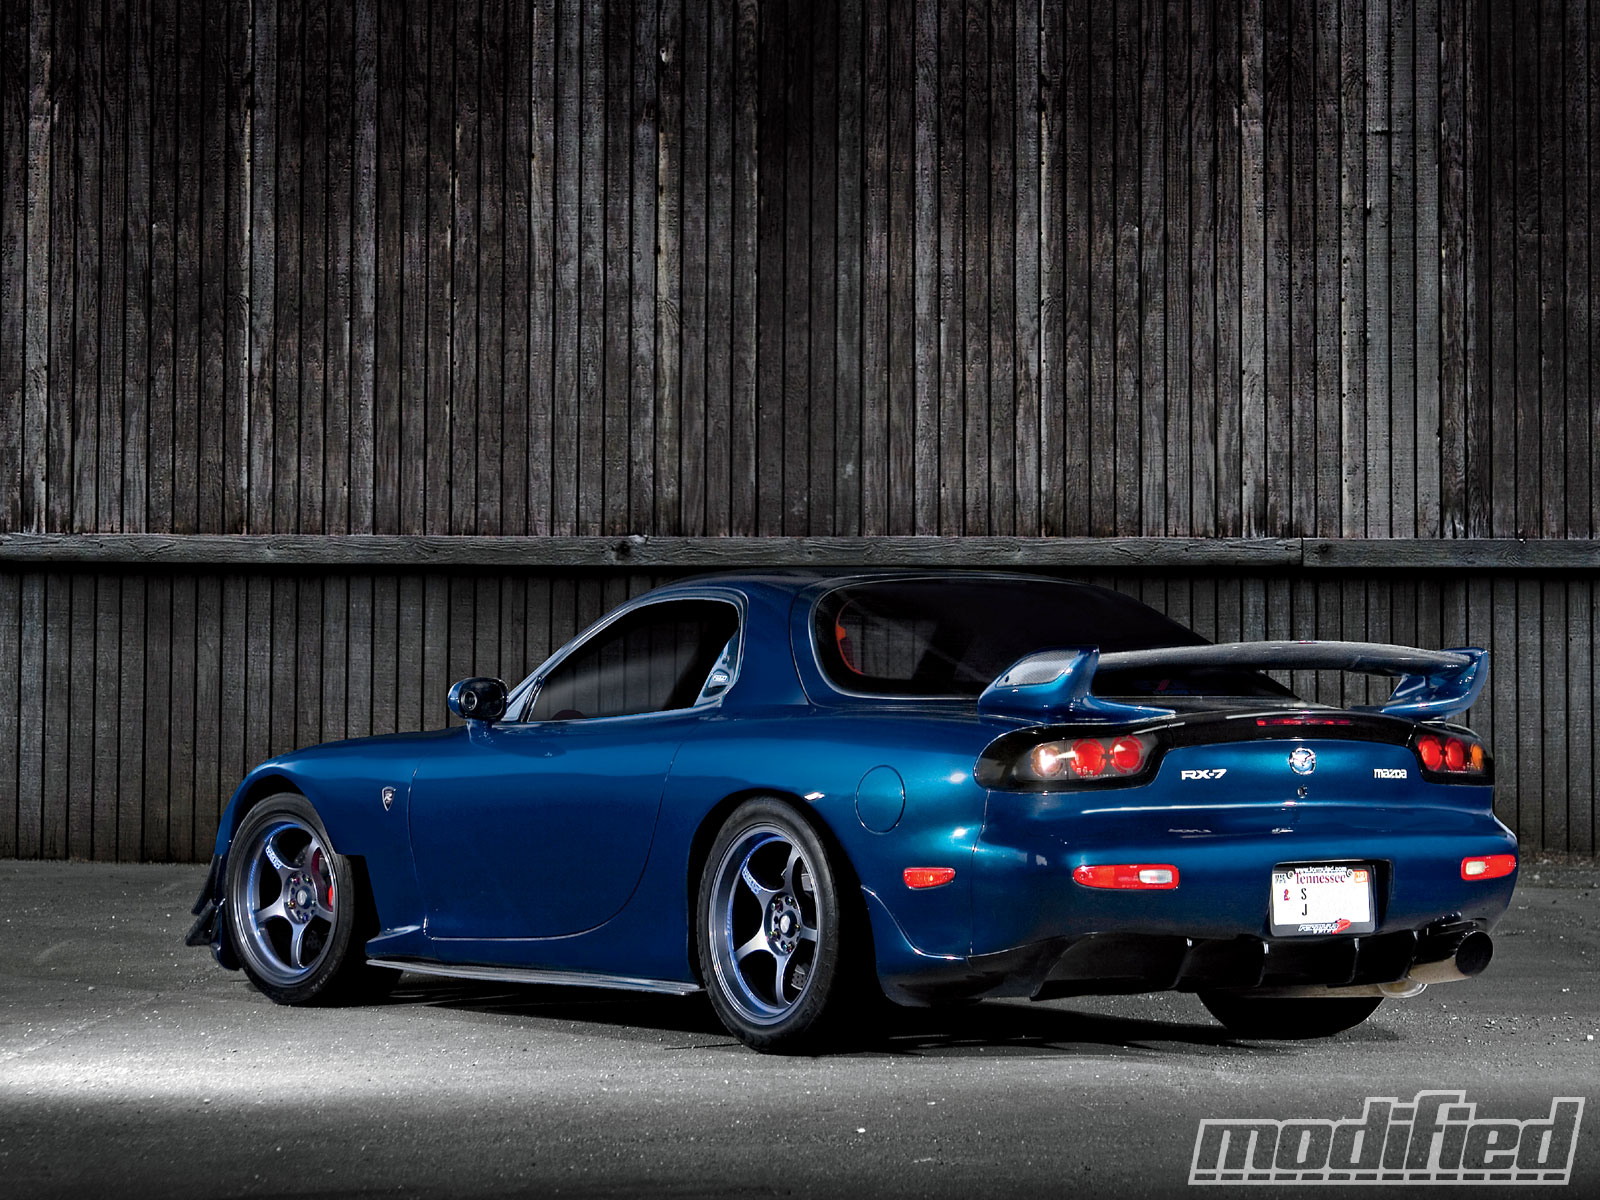 1993 Mazda Rx 7 Hd Wallpapers 7wallpapers Net Images, Photos, Reviews